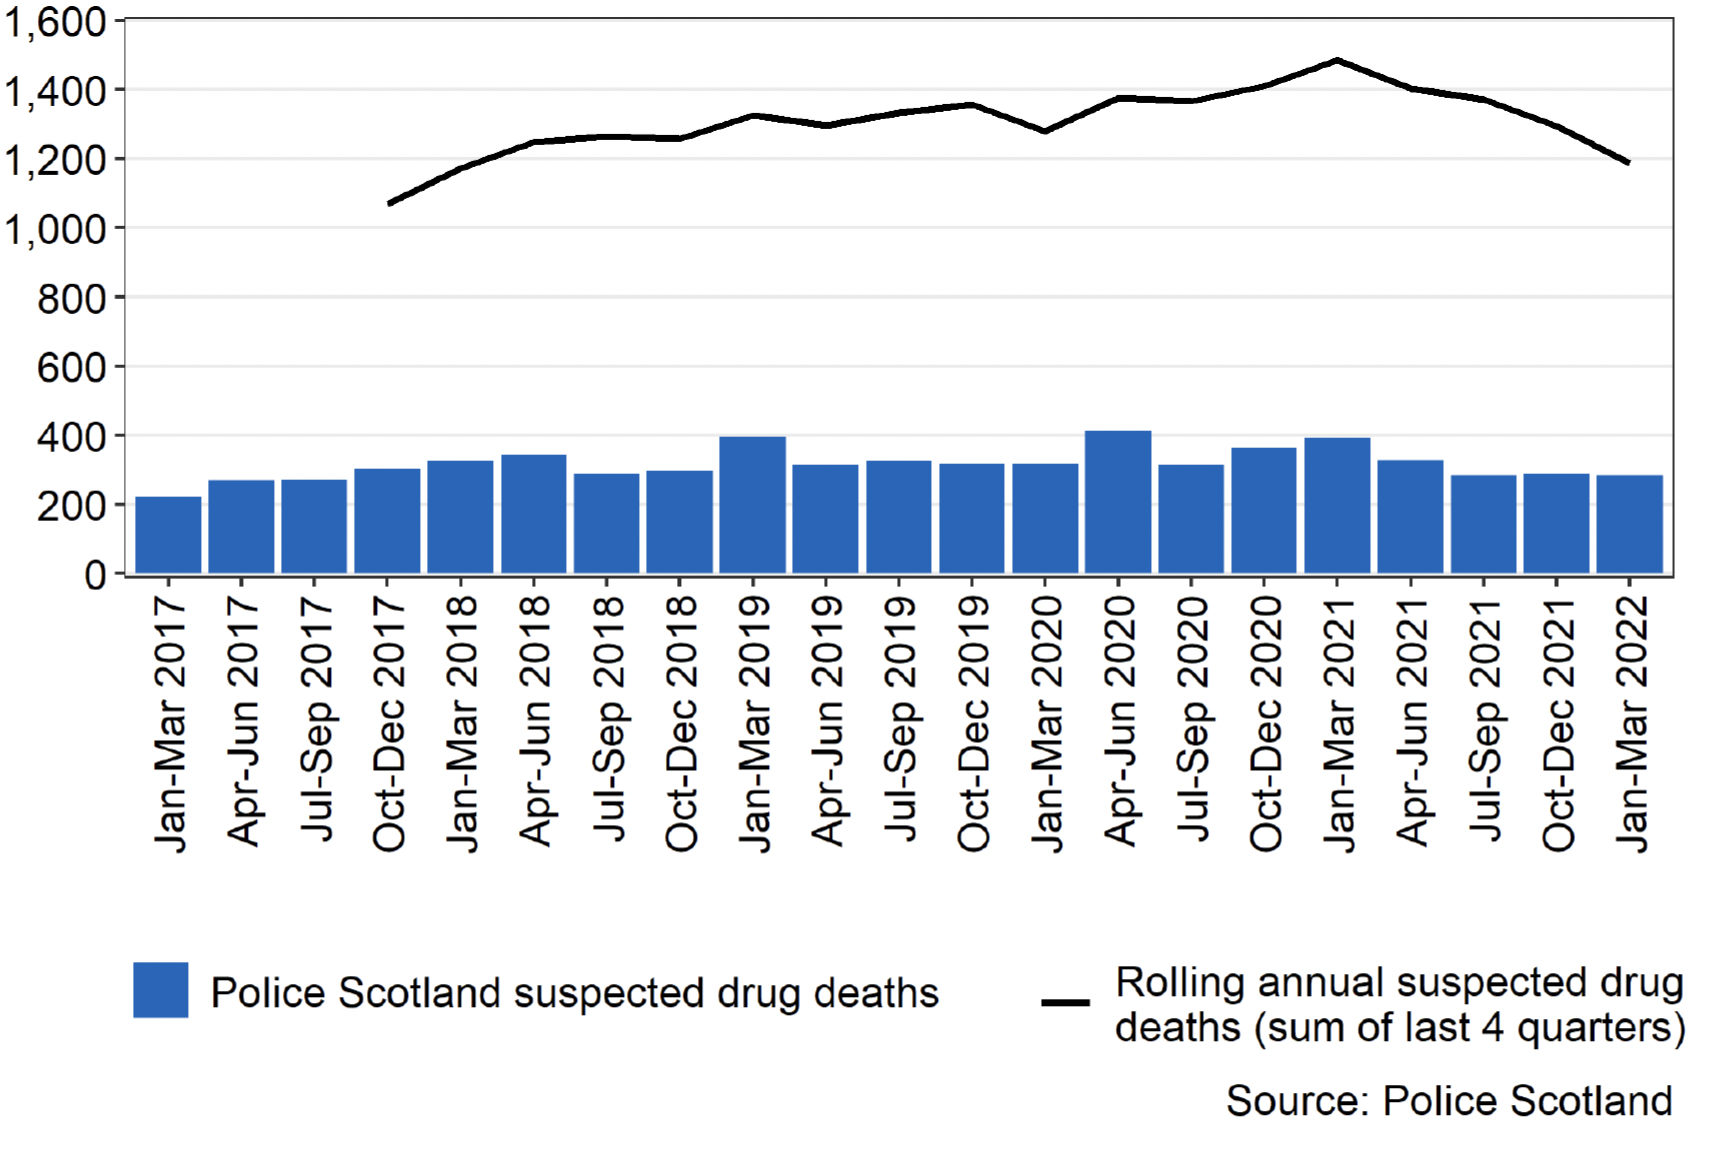 Bar Chart showing the number of suspected drug deaths each calendar year quarter with line graph showing rolling annual suspected drug death (sum of latest 4 quarters)